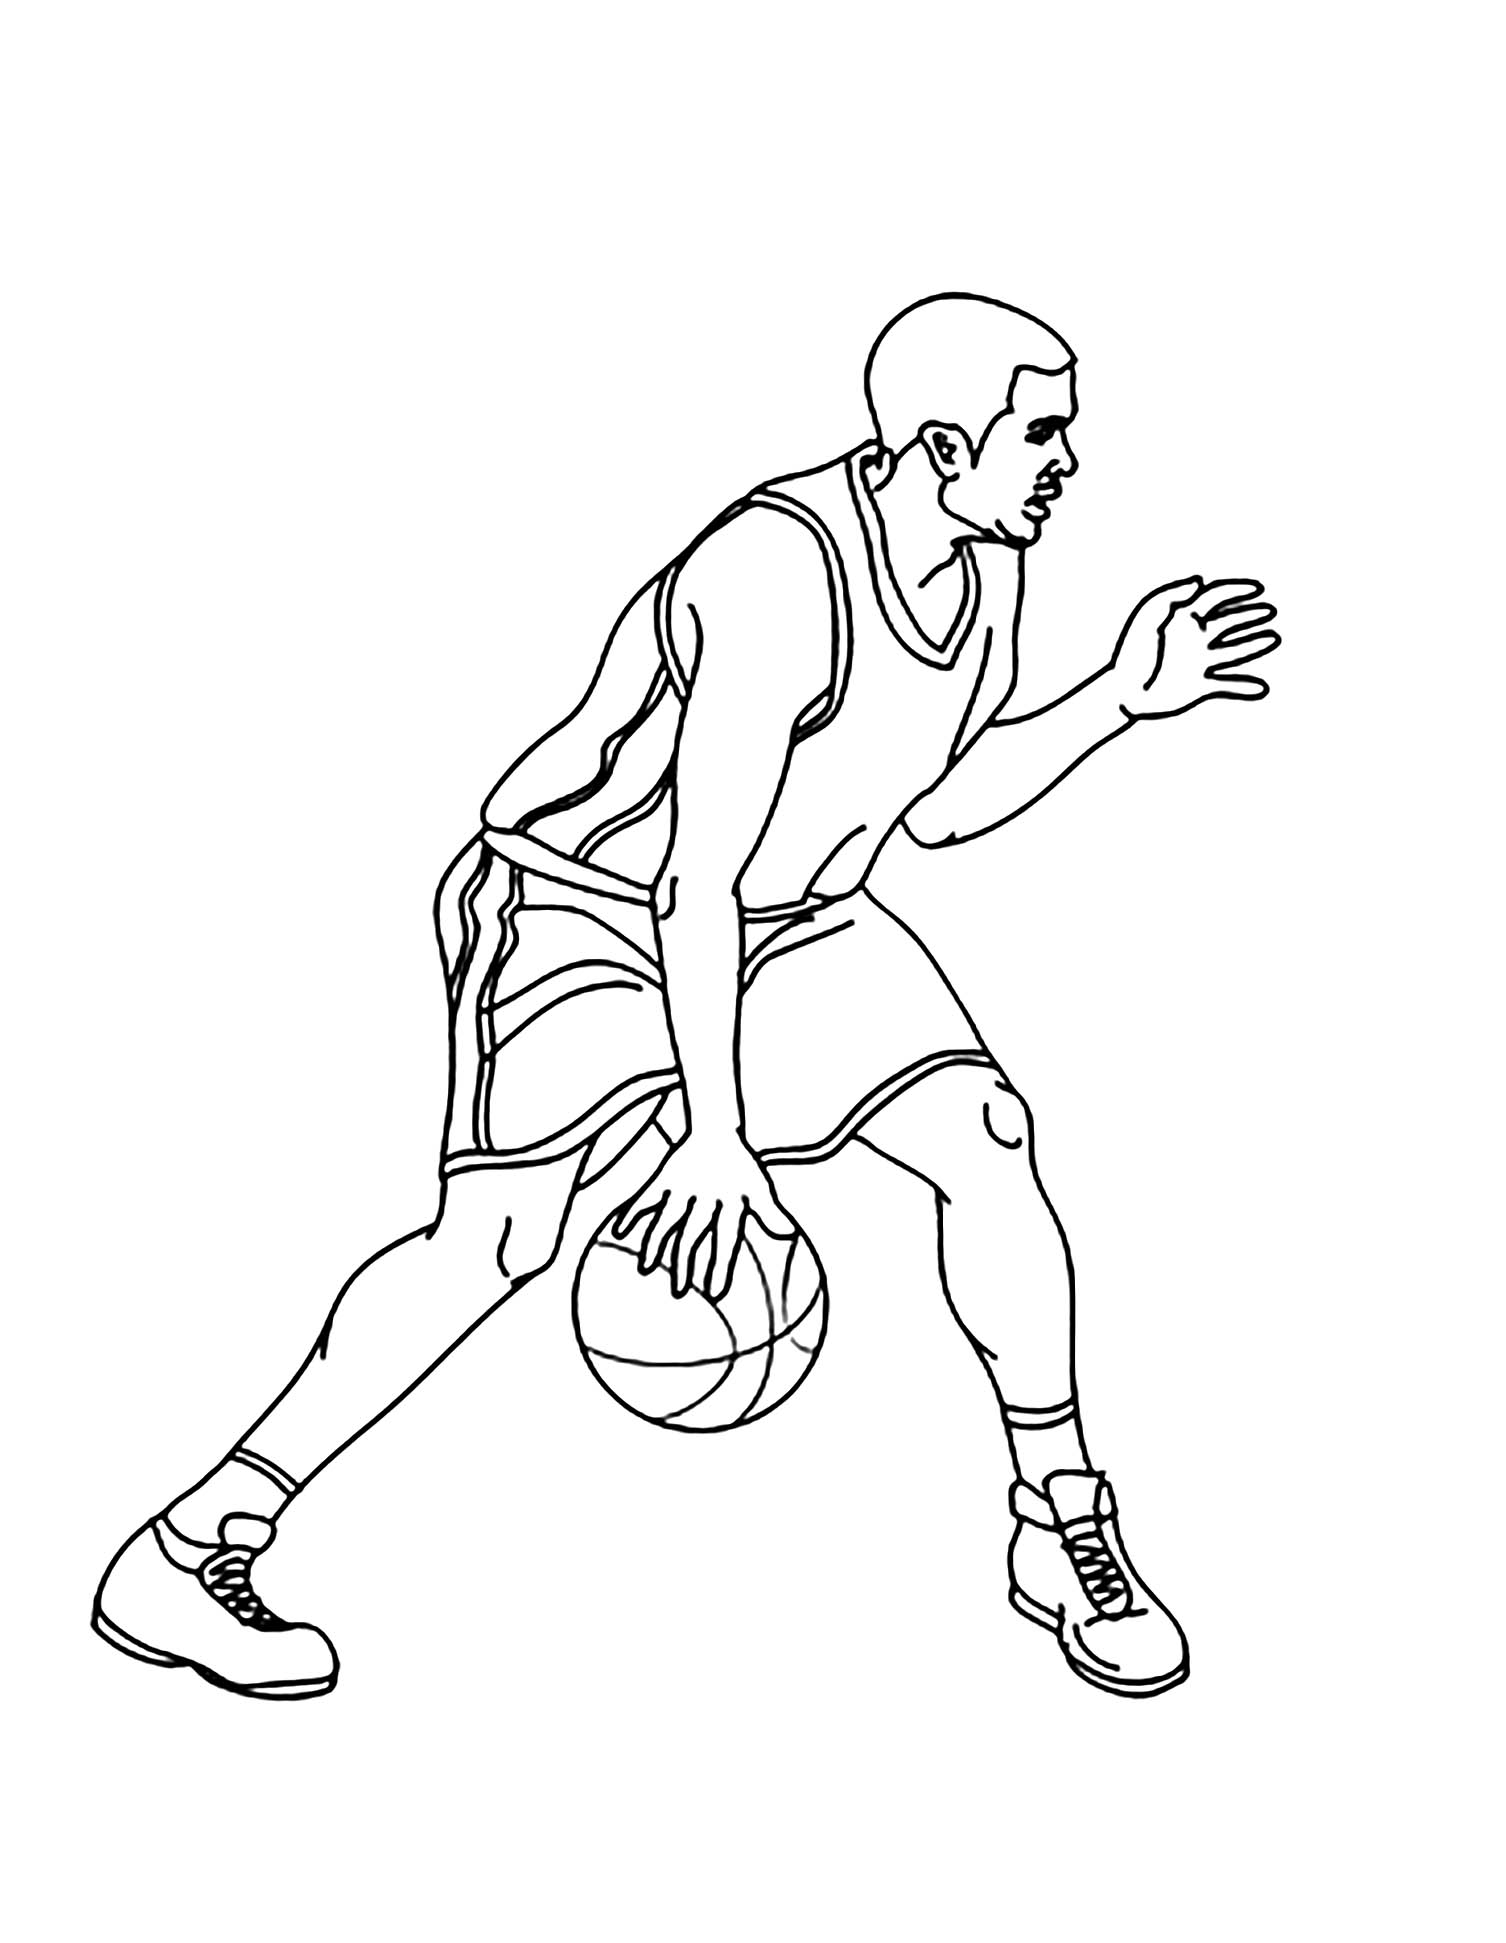 Basketball coloring pages for kids Basketball Kids Coloring Pages